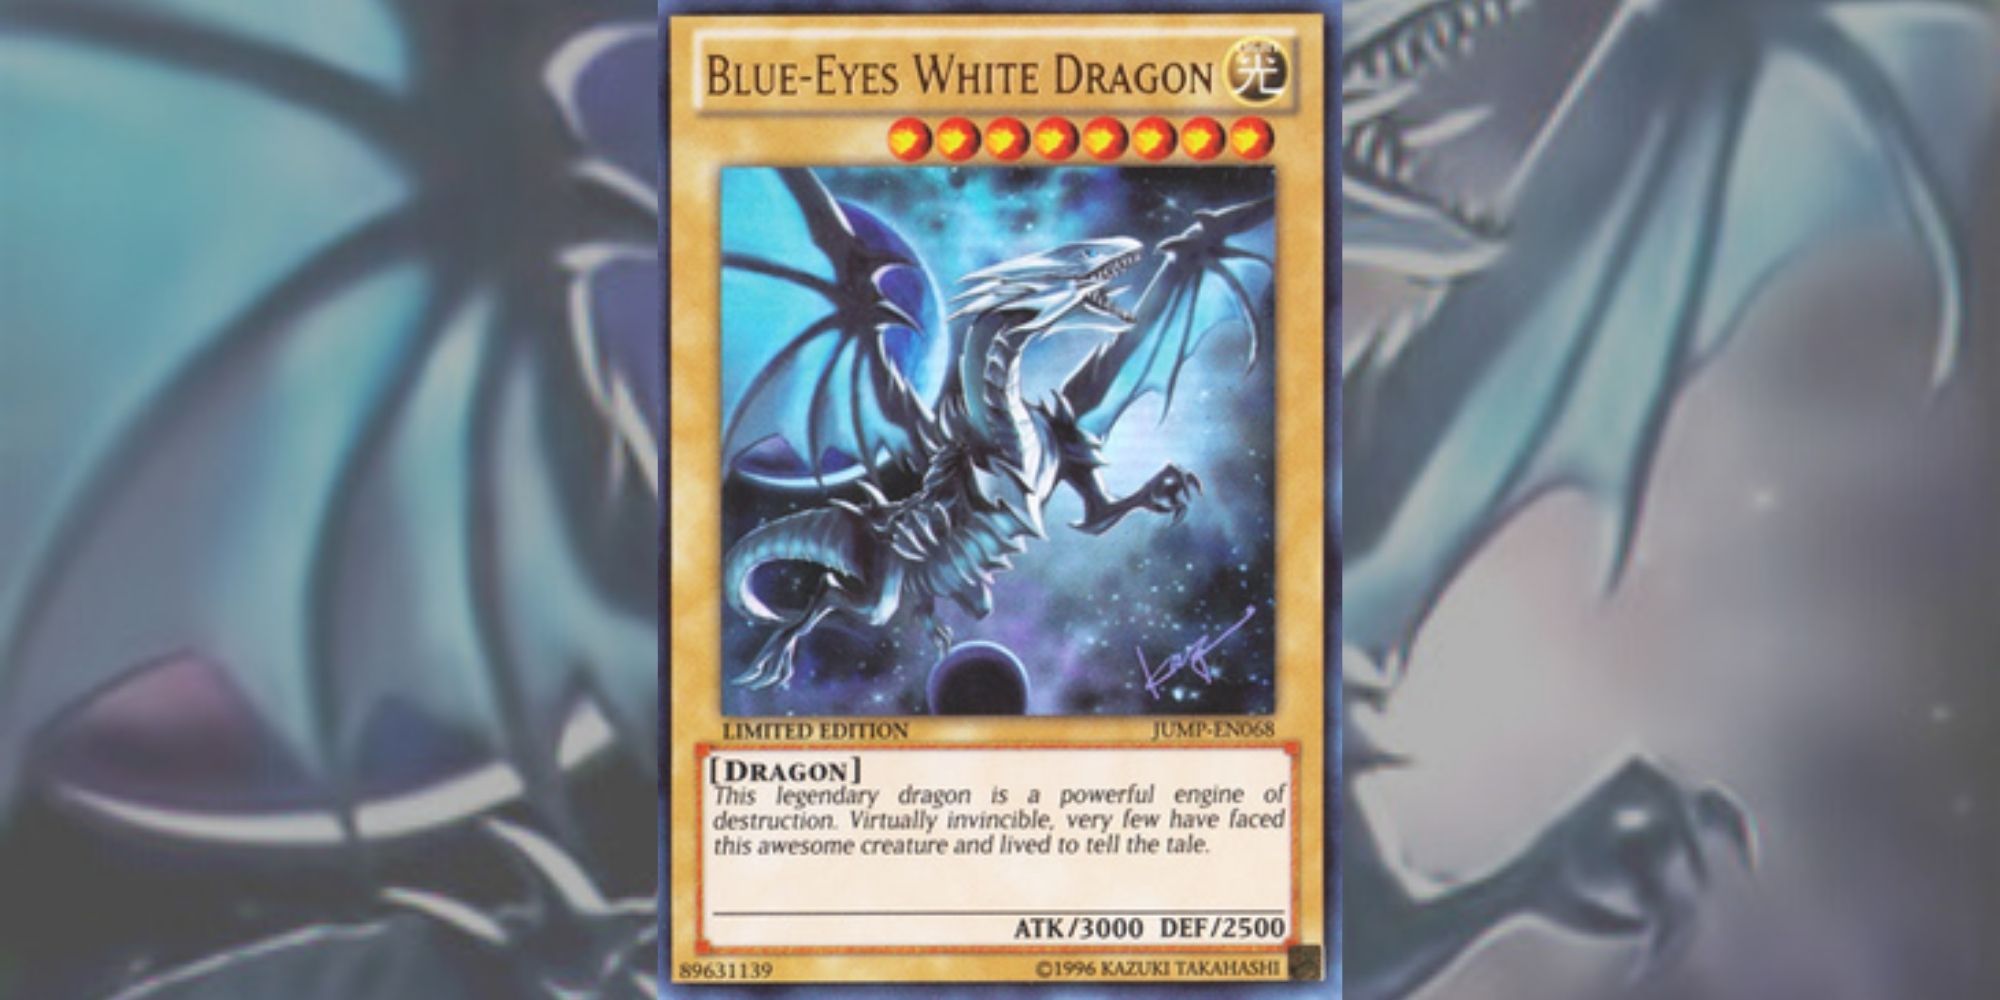 Yu-Gi-Oh! Card Blue-Eyes White Dragon against background made from card art.